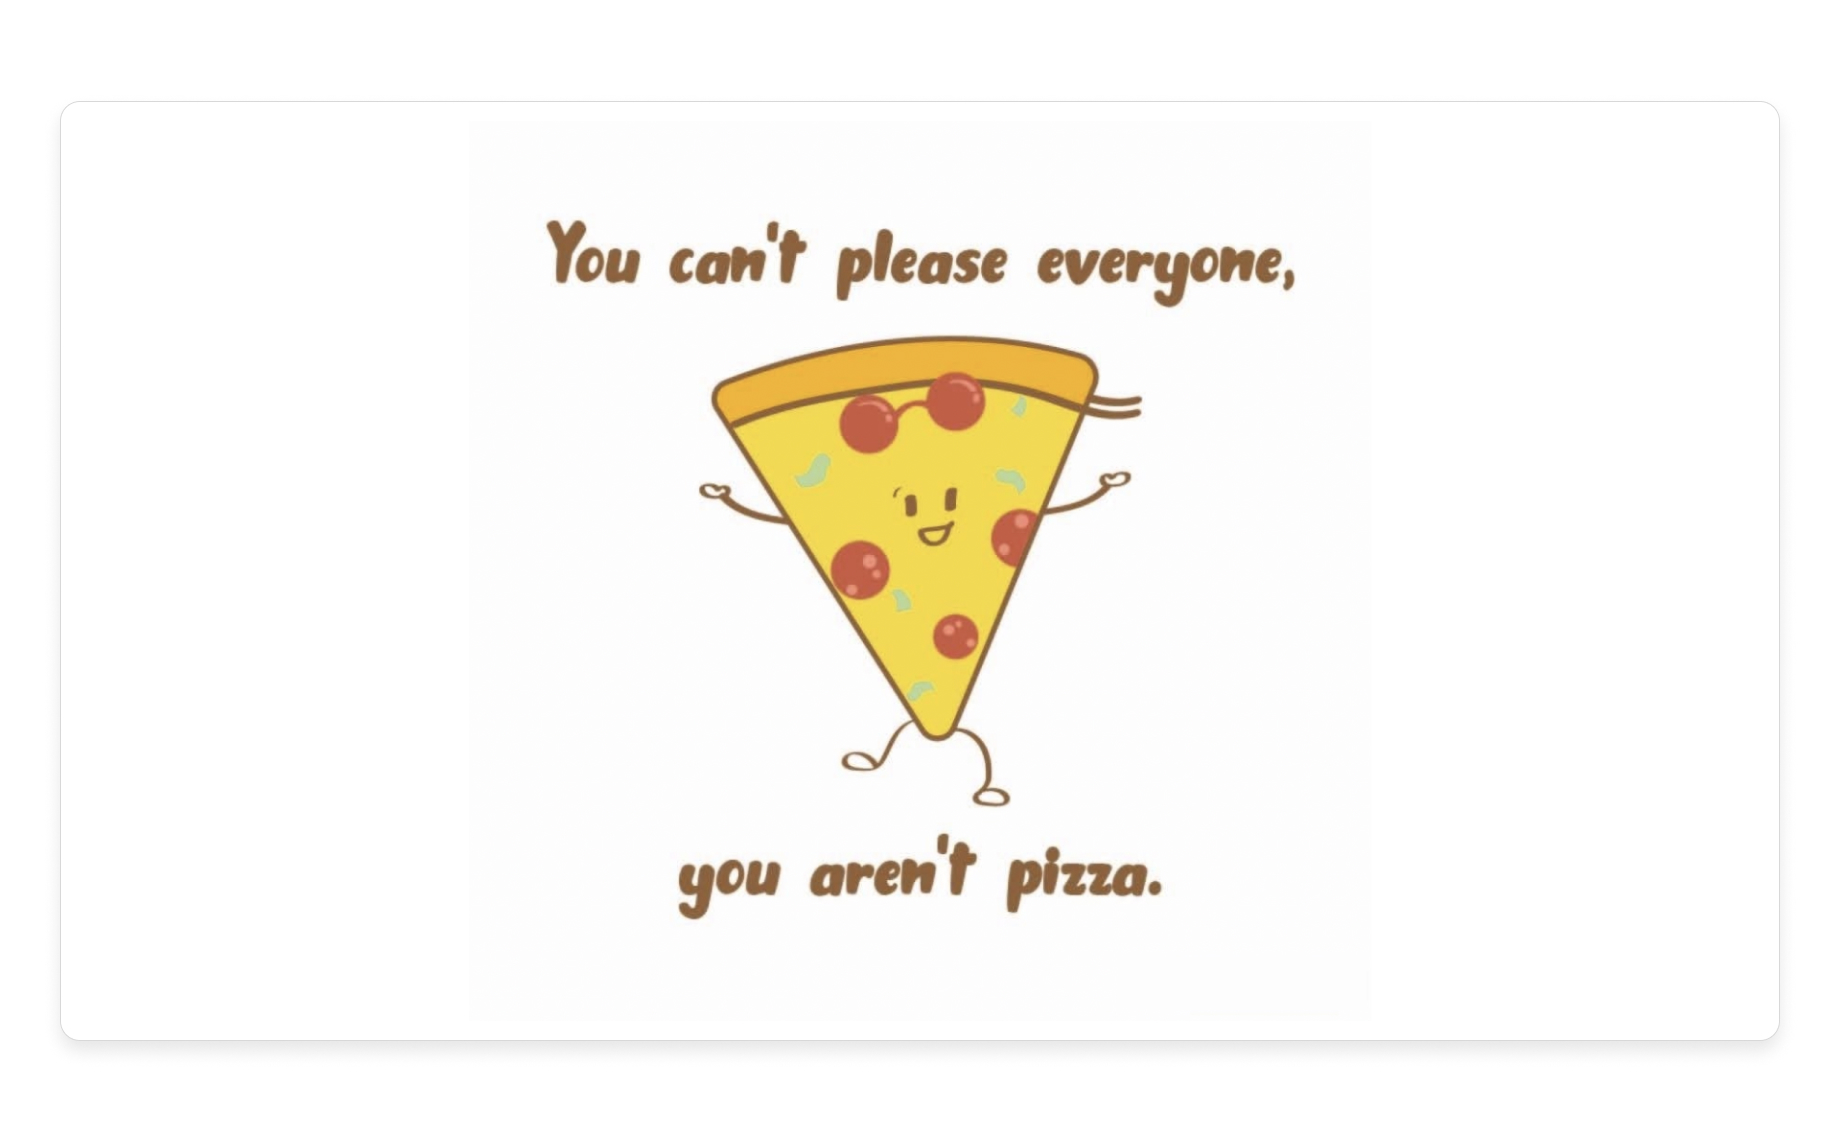 "You can't please all the people all the time" - you're not pizza